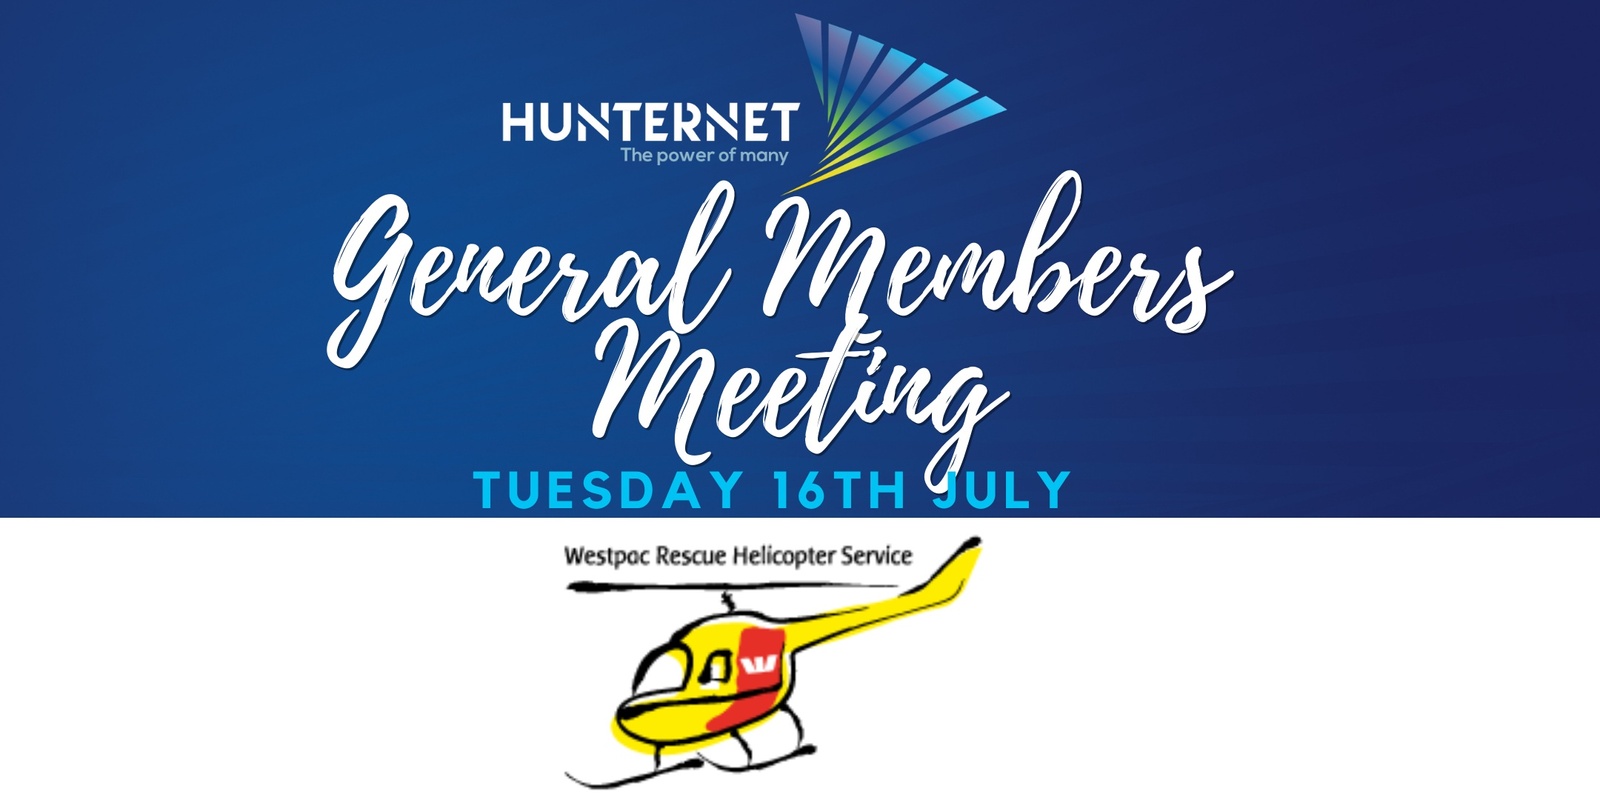 Banner image for HunterNet General Members Meeting - Hosted by Westpac Rescue Helicopter Service